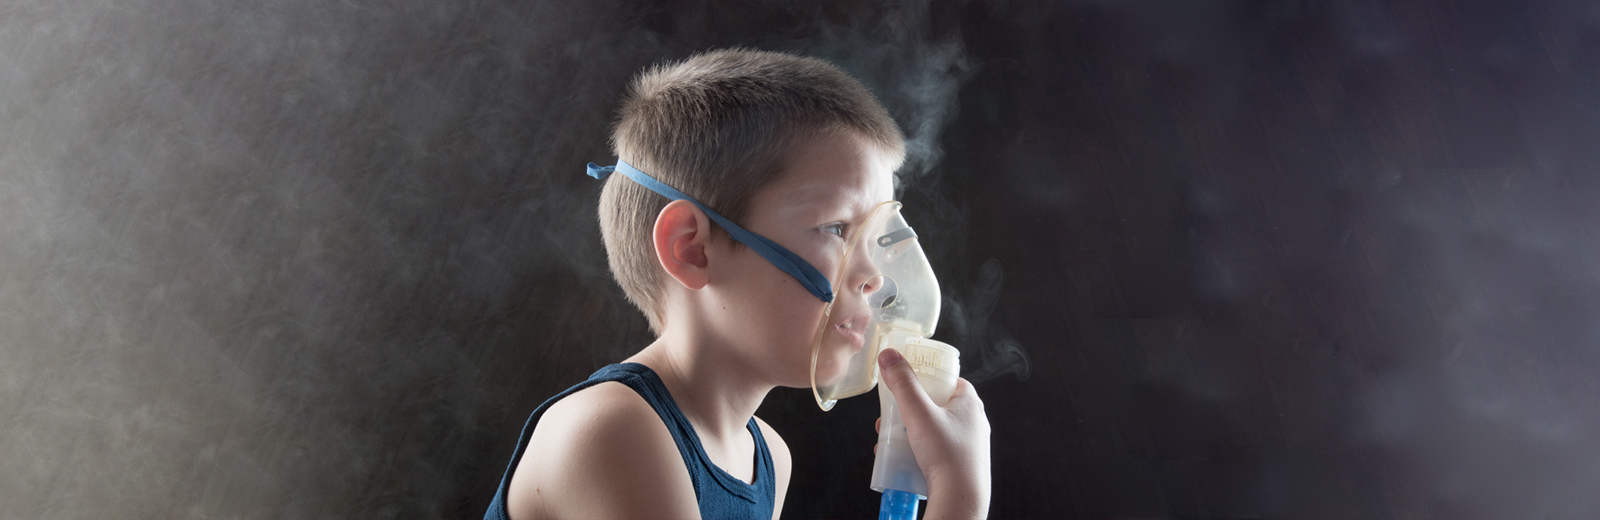 Asthmatic Bronchitis: When Asthma Leads to Bronchitis 